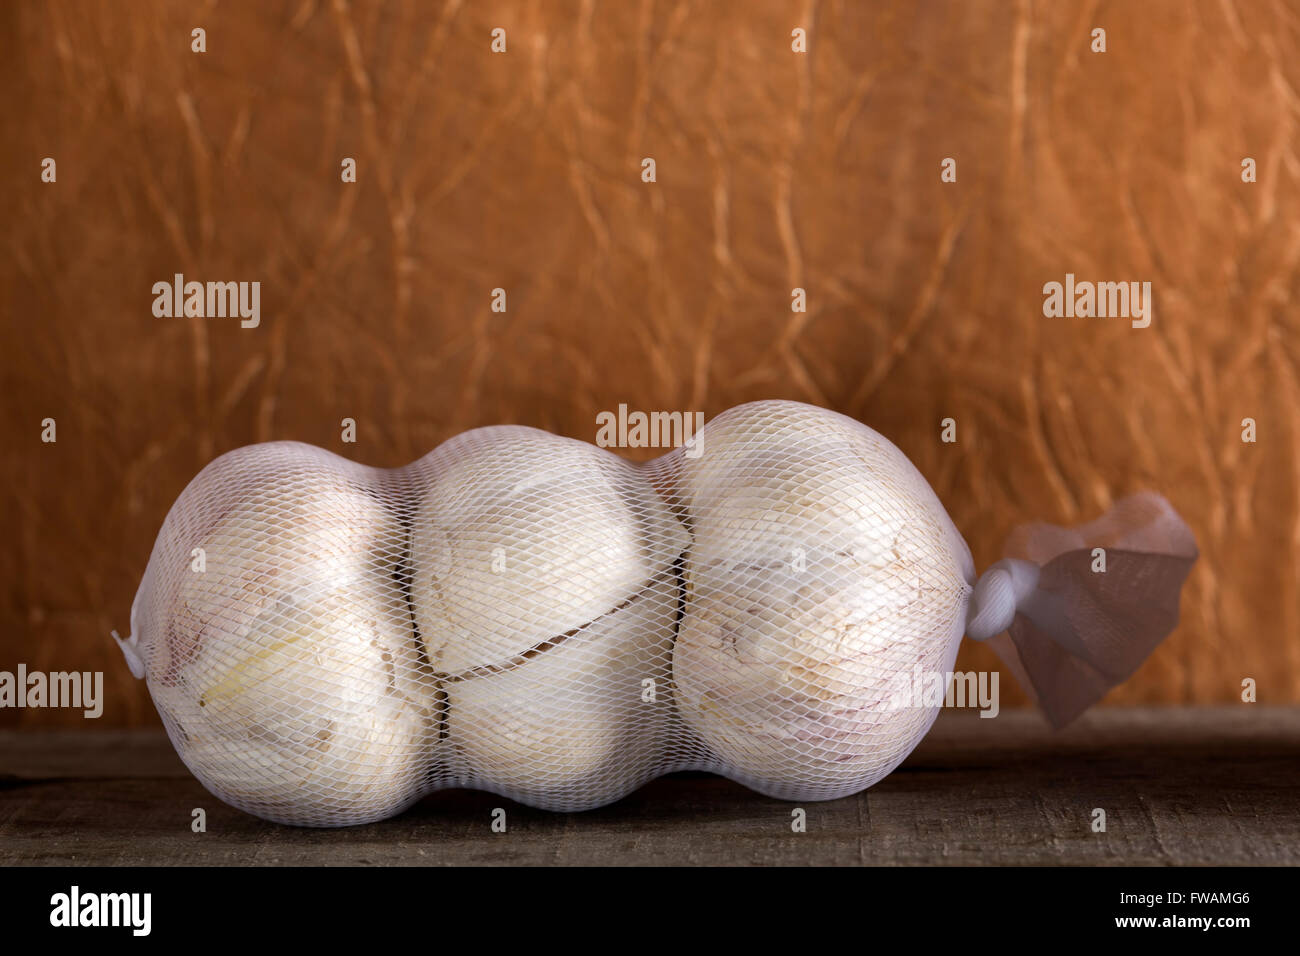 One packaged garlic over old wooden table Stock Photo